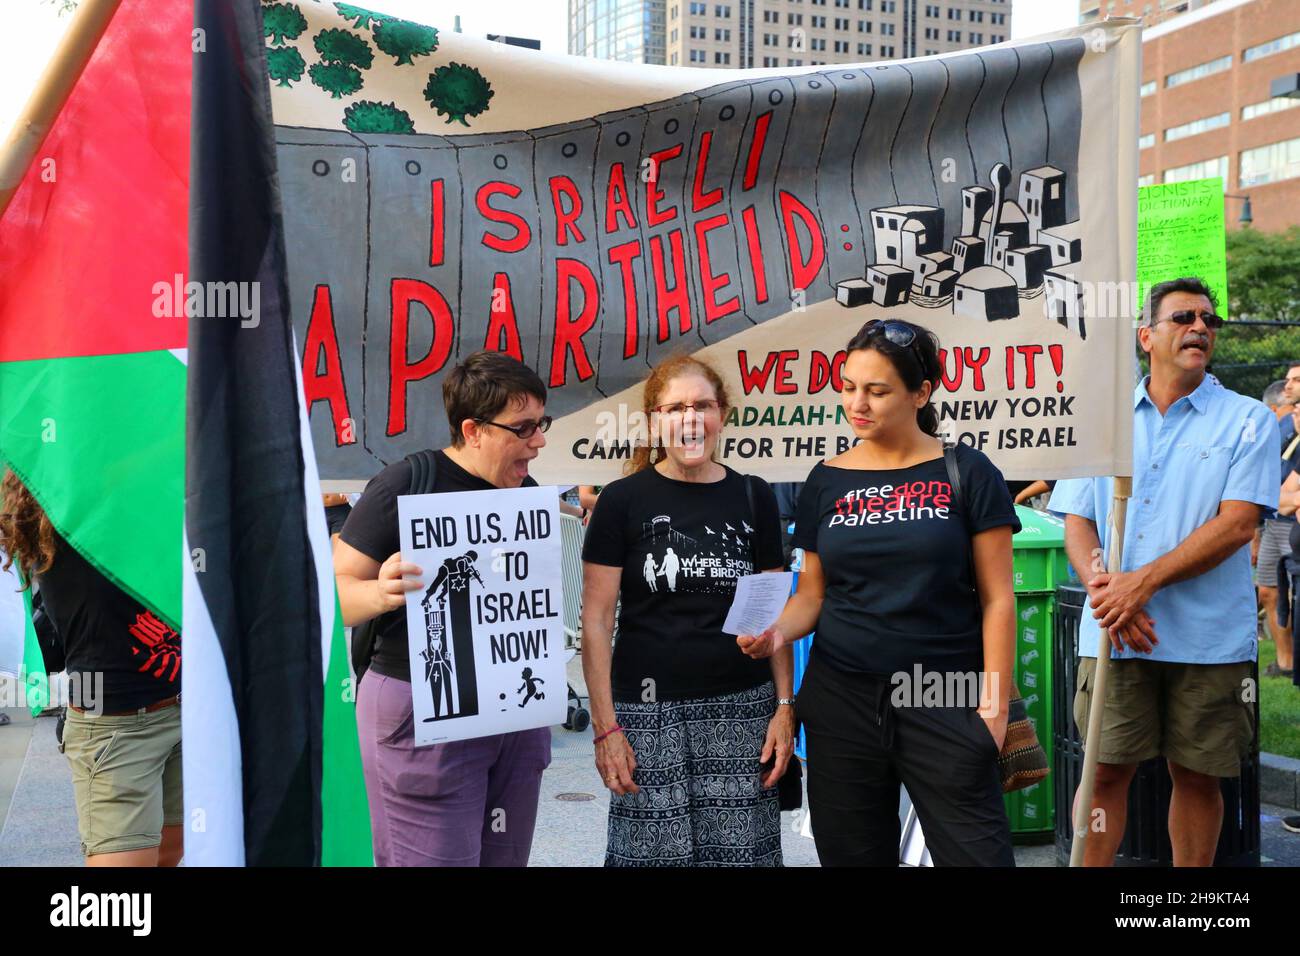 People display flags & banners, & demand an end to US aid to Israel at the National Day of Action for Gaza organized by Adalah-NY, NYC, July 24, 2014 Stock Photo